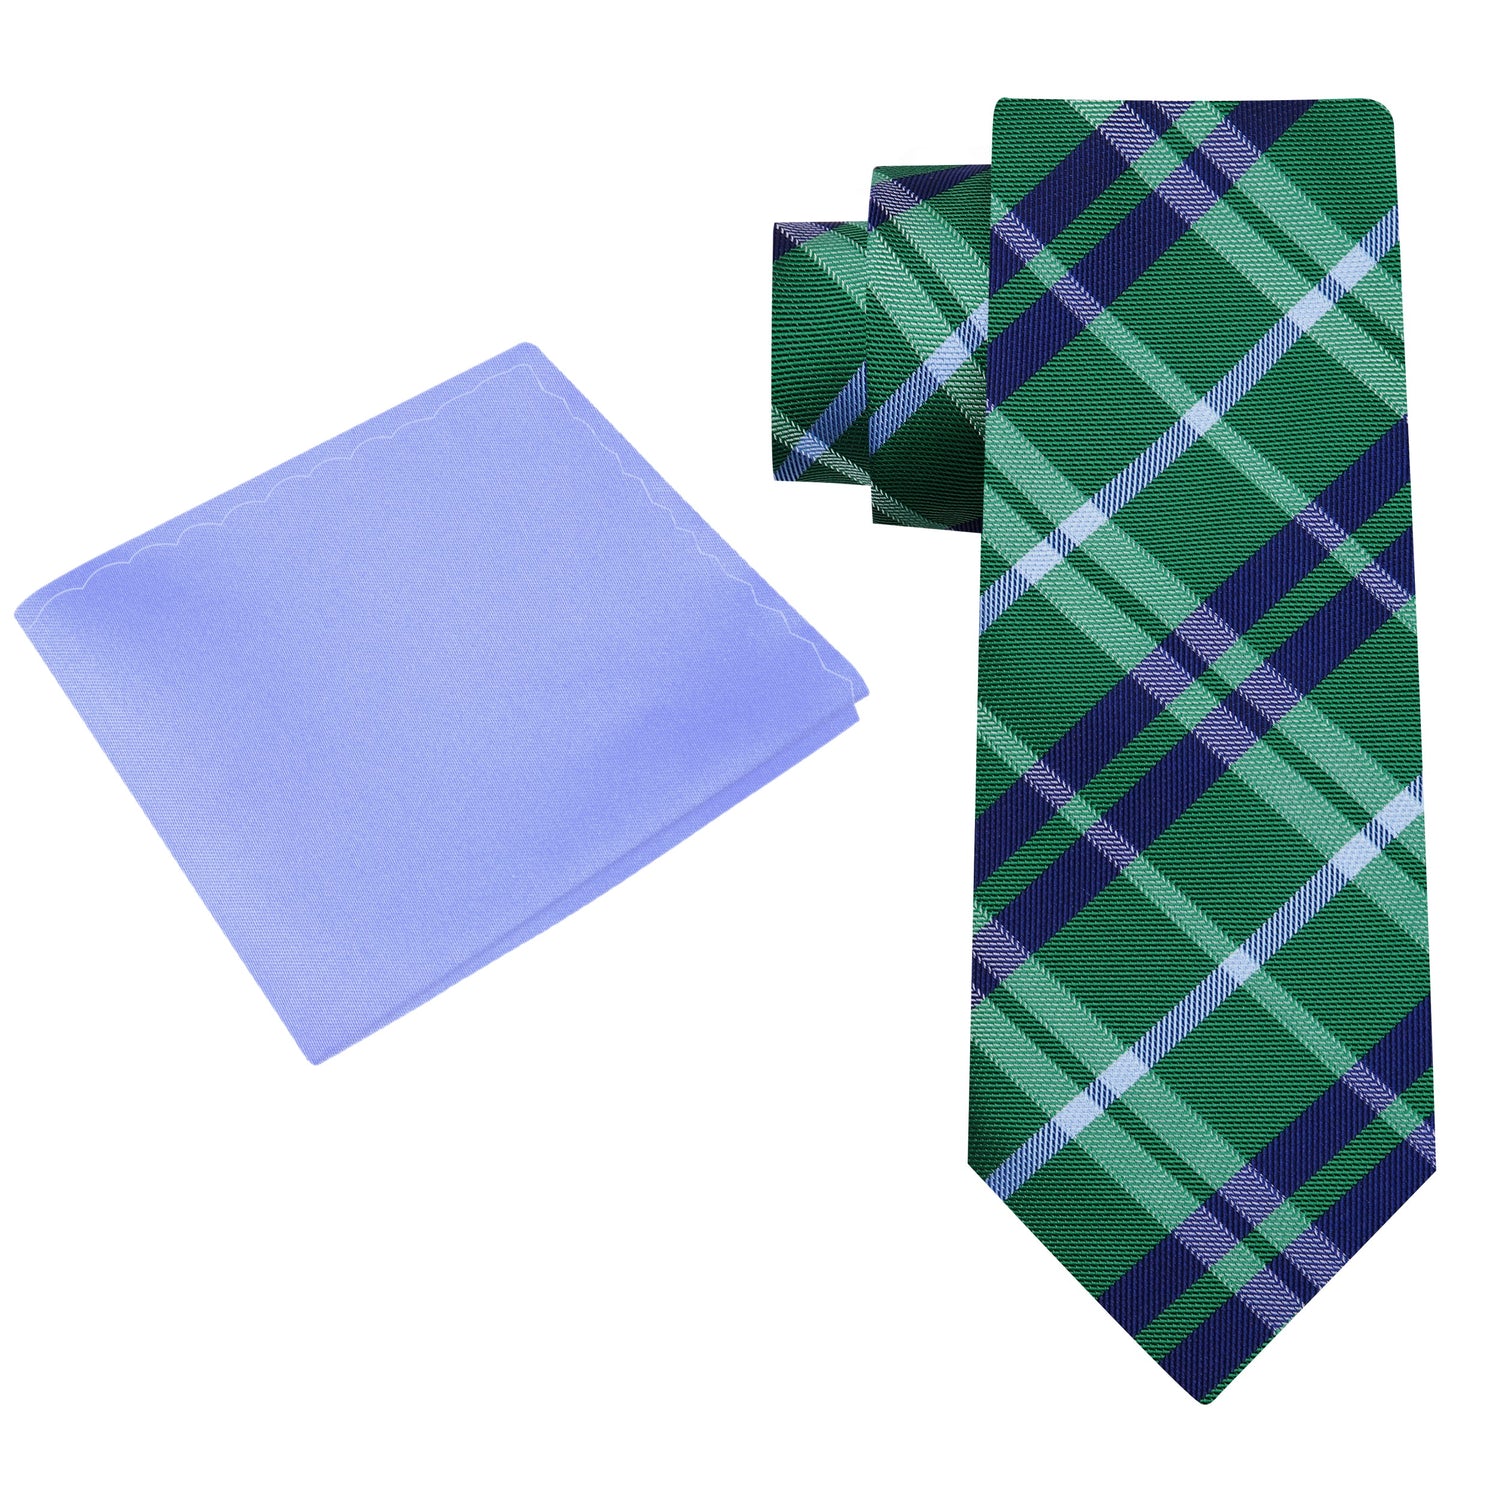 Alt View: Green and Blue Plaid Tie and Accenting Square